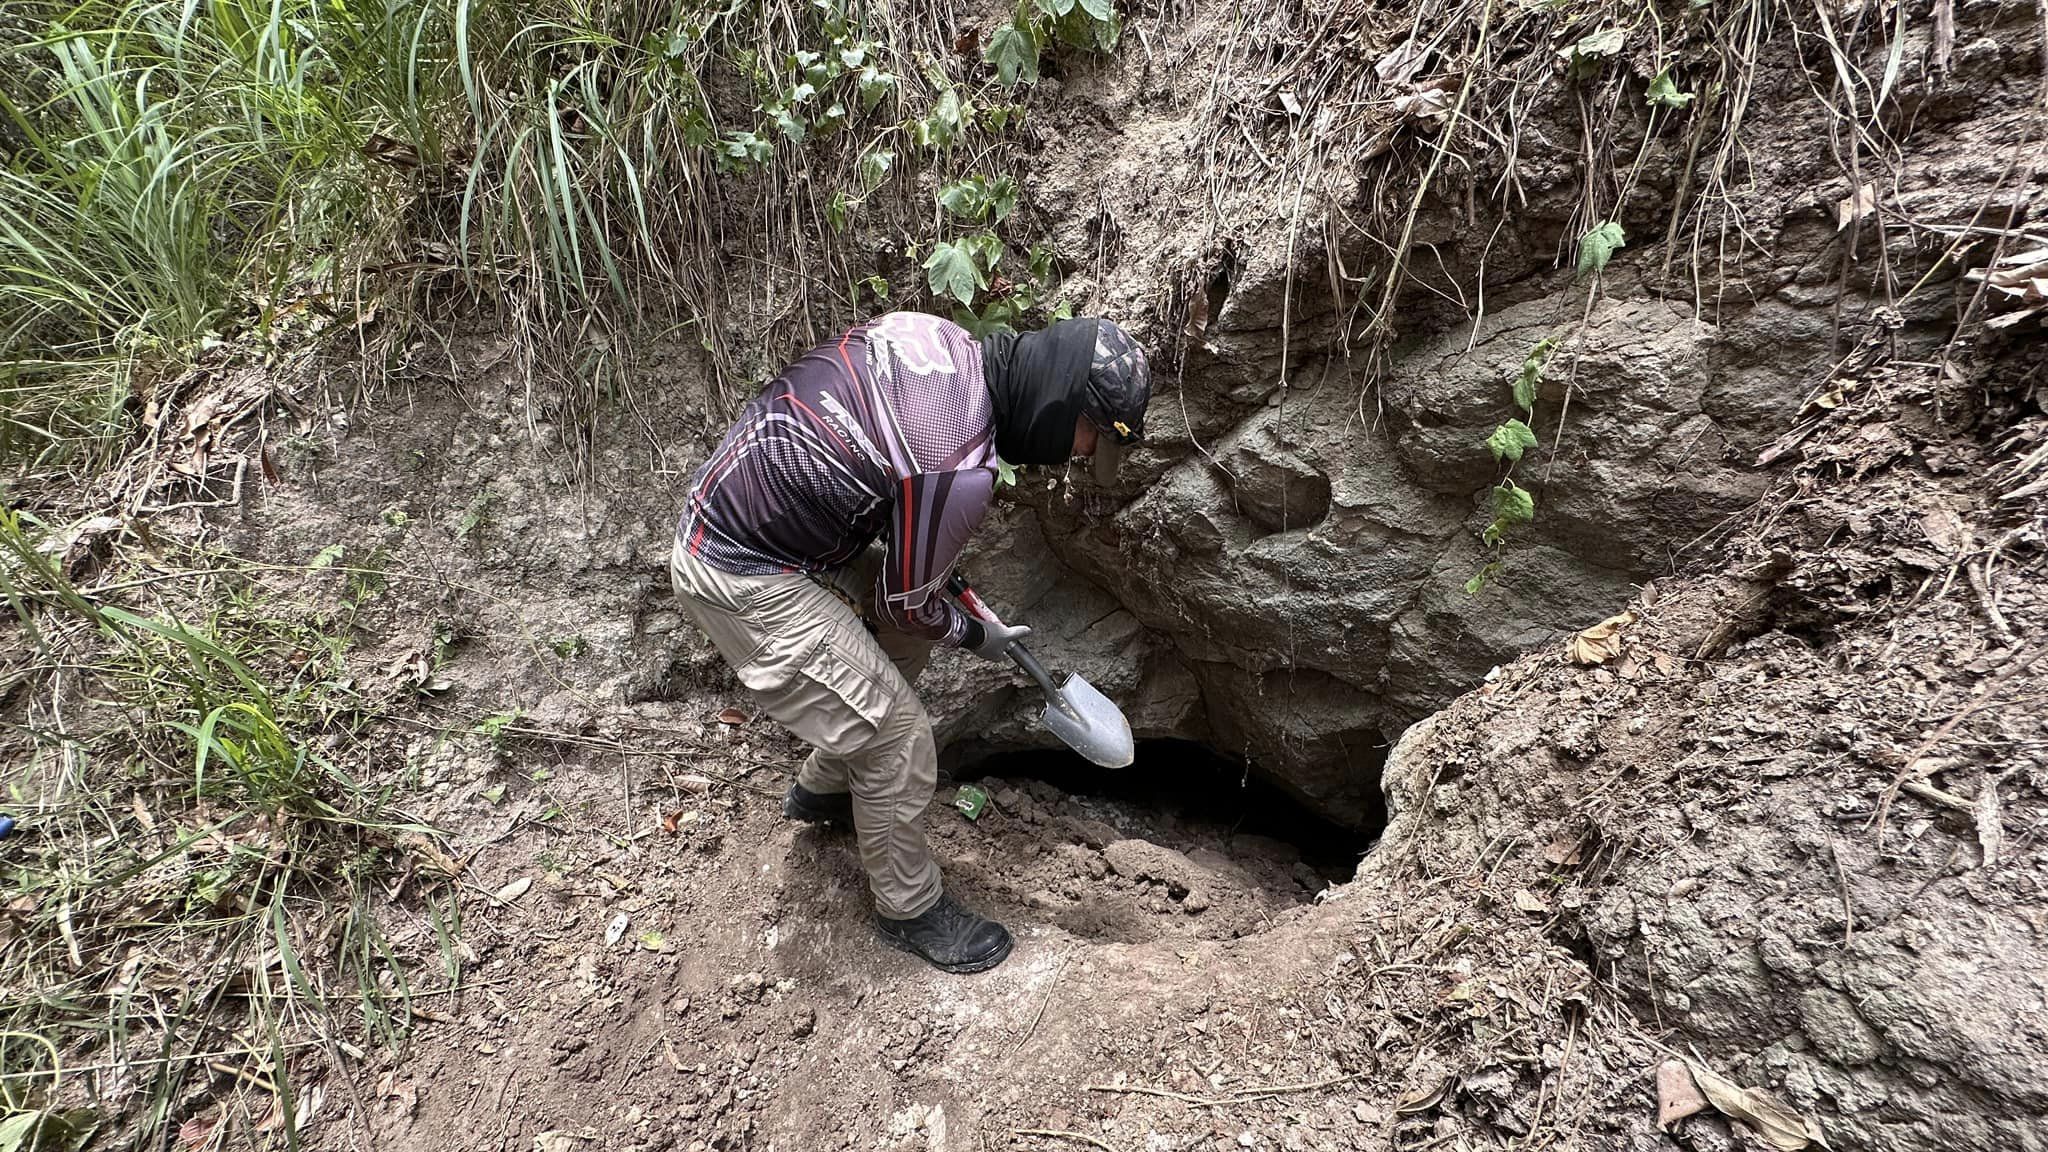 There used to be more than 50 tunnels of Panaisan. Now, one a handful are still open and most of them were closed due to soil erosion, landslide, and human activity. 